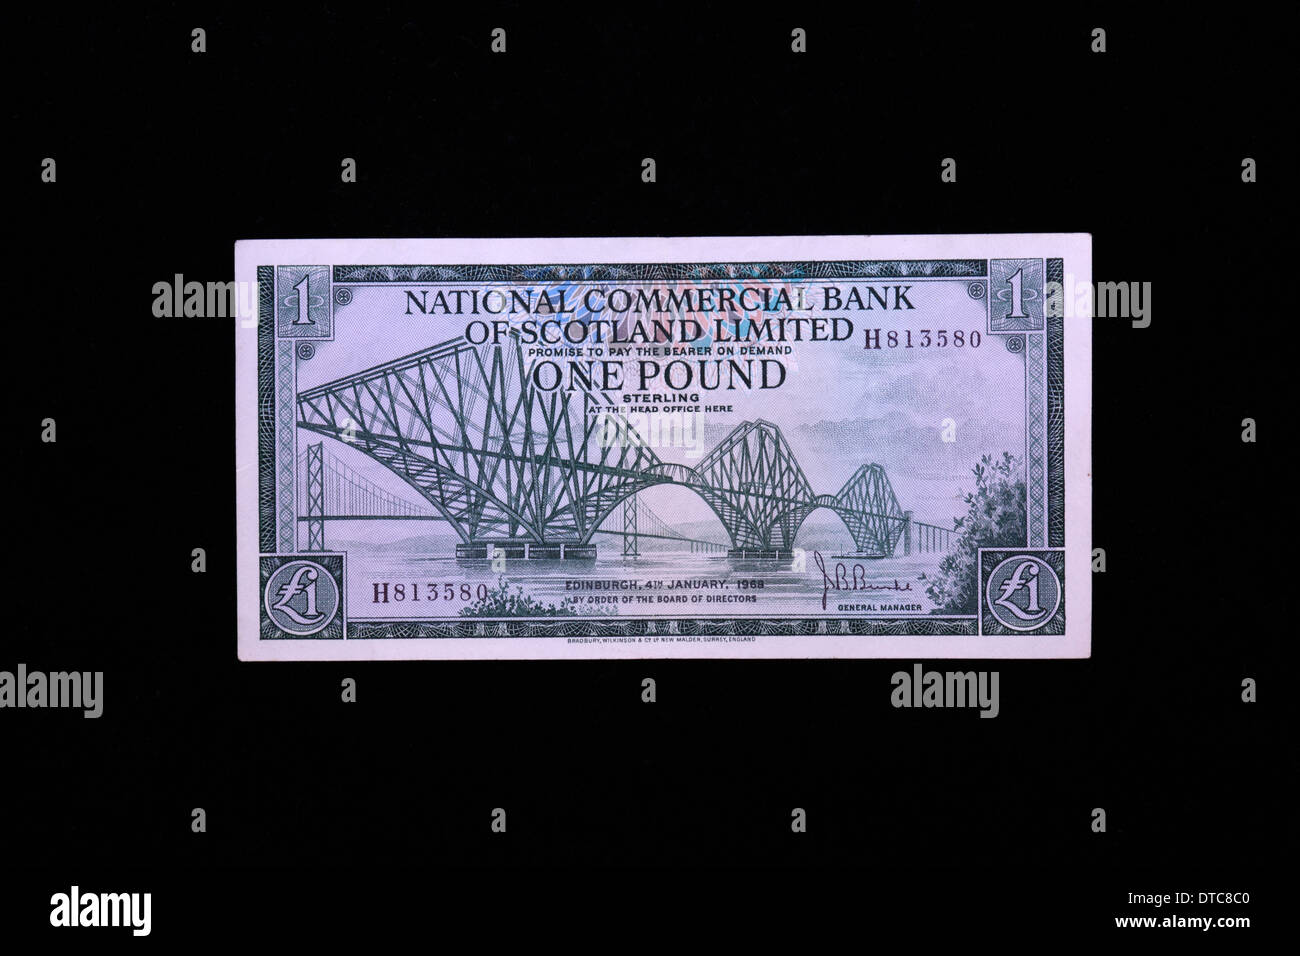 One Pound Sterling note with image of Forth Rail Bridge on black background, issued by National Commercial Bank of Scotland Stock Photo